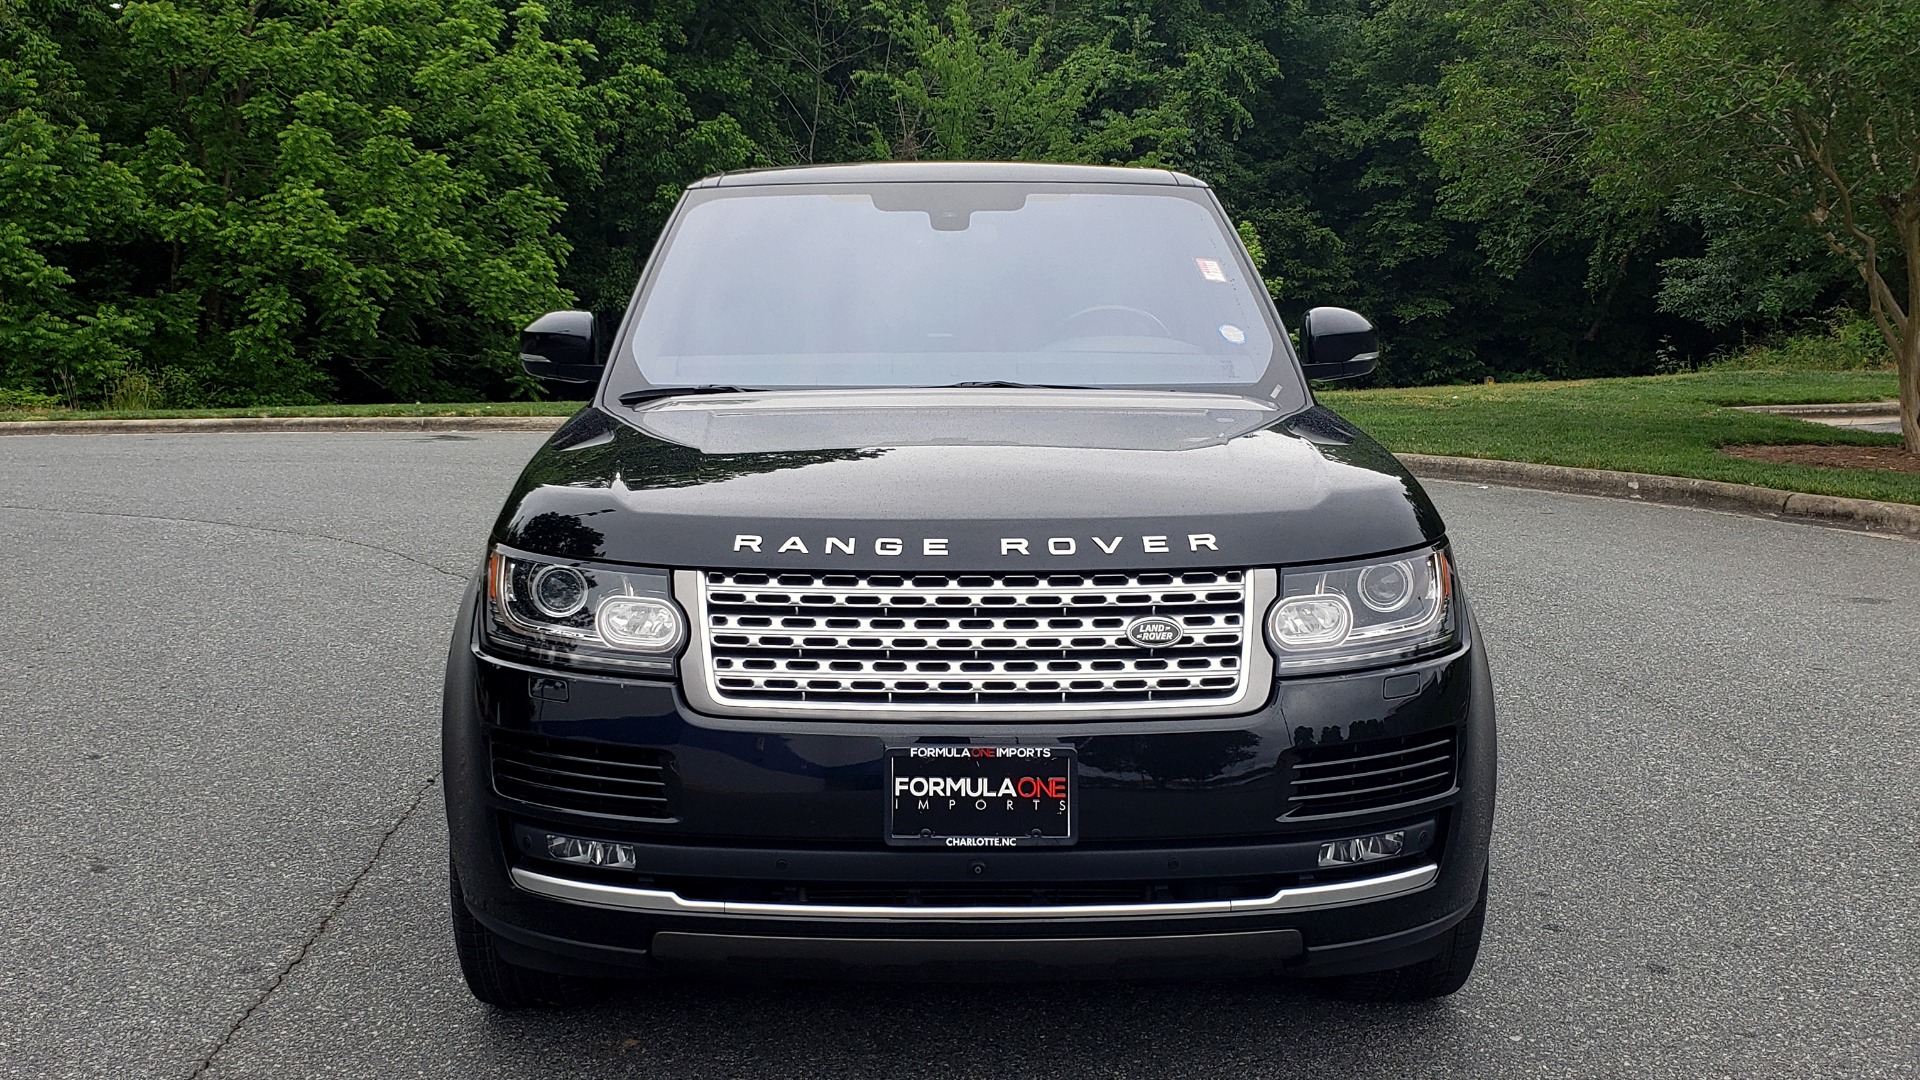 Used 2016 Land Rover RANGE ROVER HSE 3.0L / NAV / PANO-ROOF / VENT SEATS / REARVIEW / BLIND SPOT for sale $47,995 at Formula Imports in Charlotte NC 28227 8